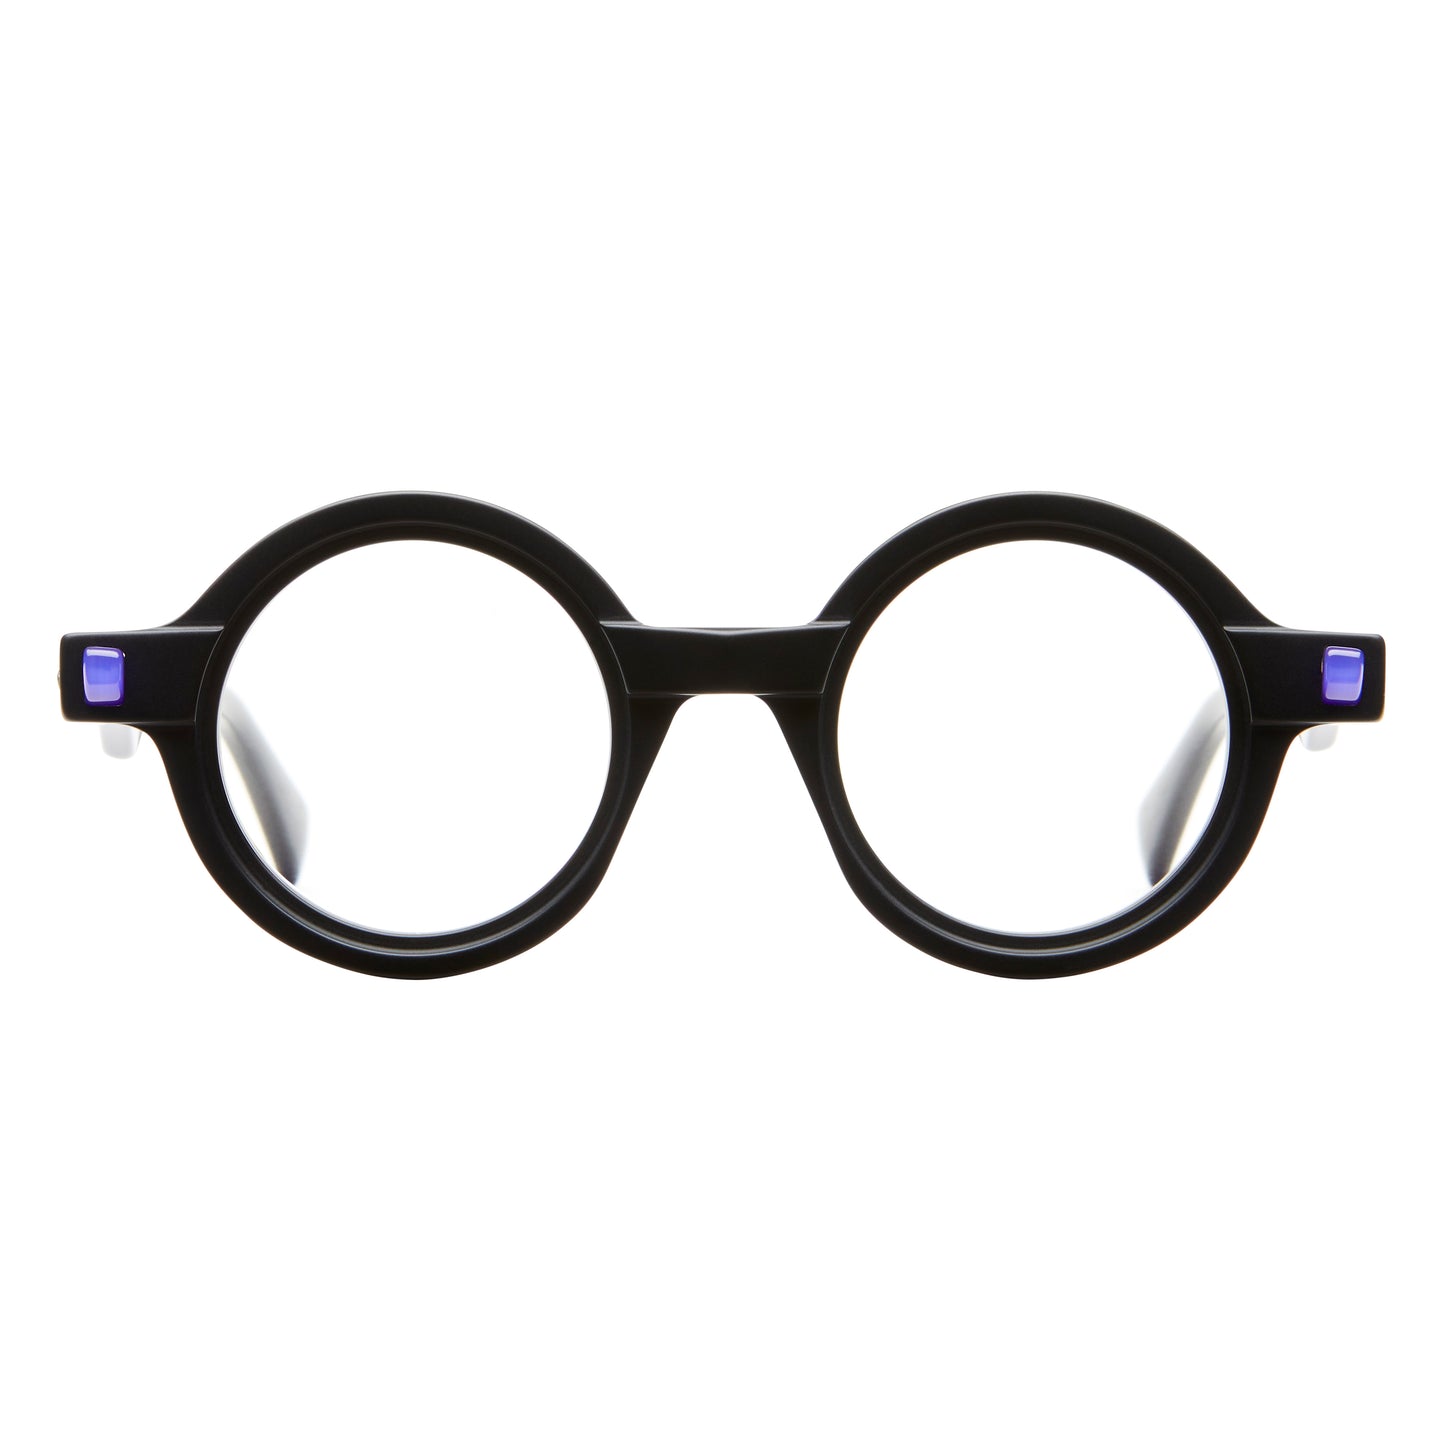 <p> Kuboraum MASKE Q7 is a  Matte black, blue; Acetate Optical Frame with a Round shape.  </p><p>Shop with confidence from Adair Eyewear, a Kuboraum Authorized Dealer.  We have provided the best in customer service and great designer eyewear for over 40 years. Visit https://adaireyewearonline.com</p>